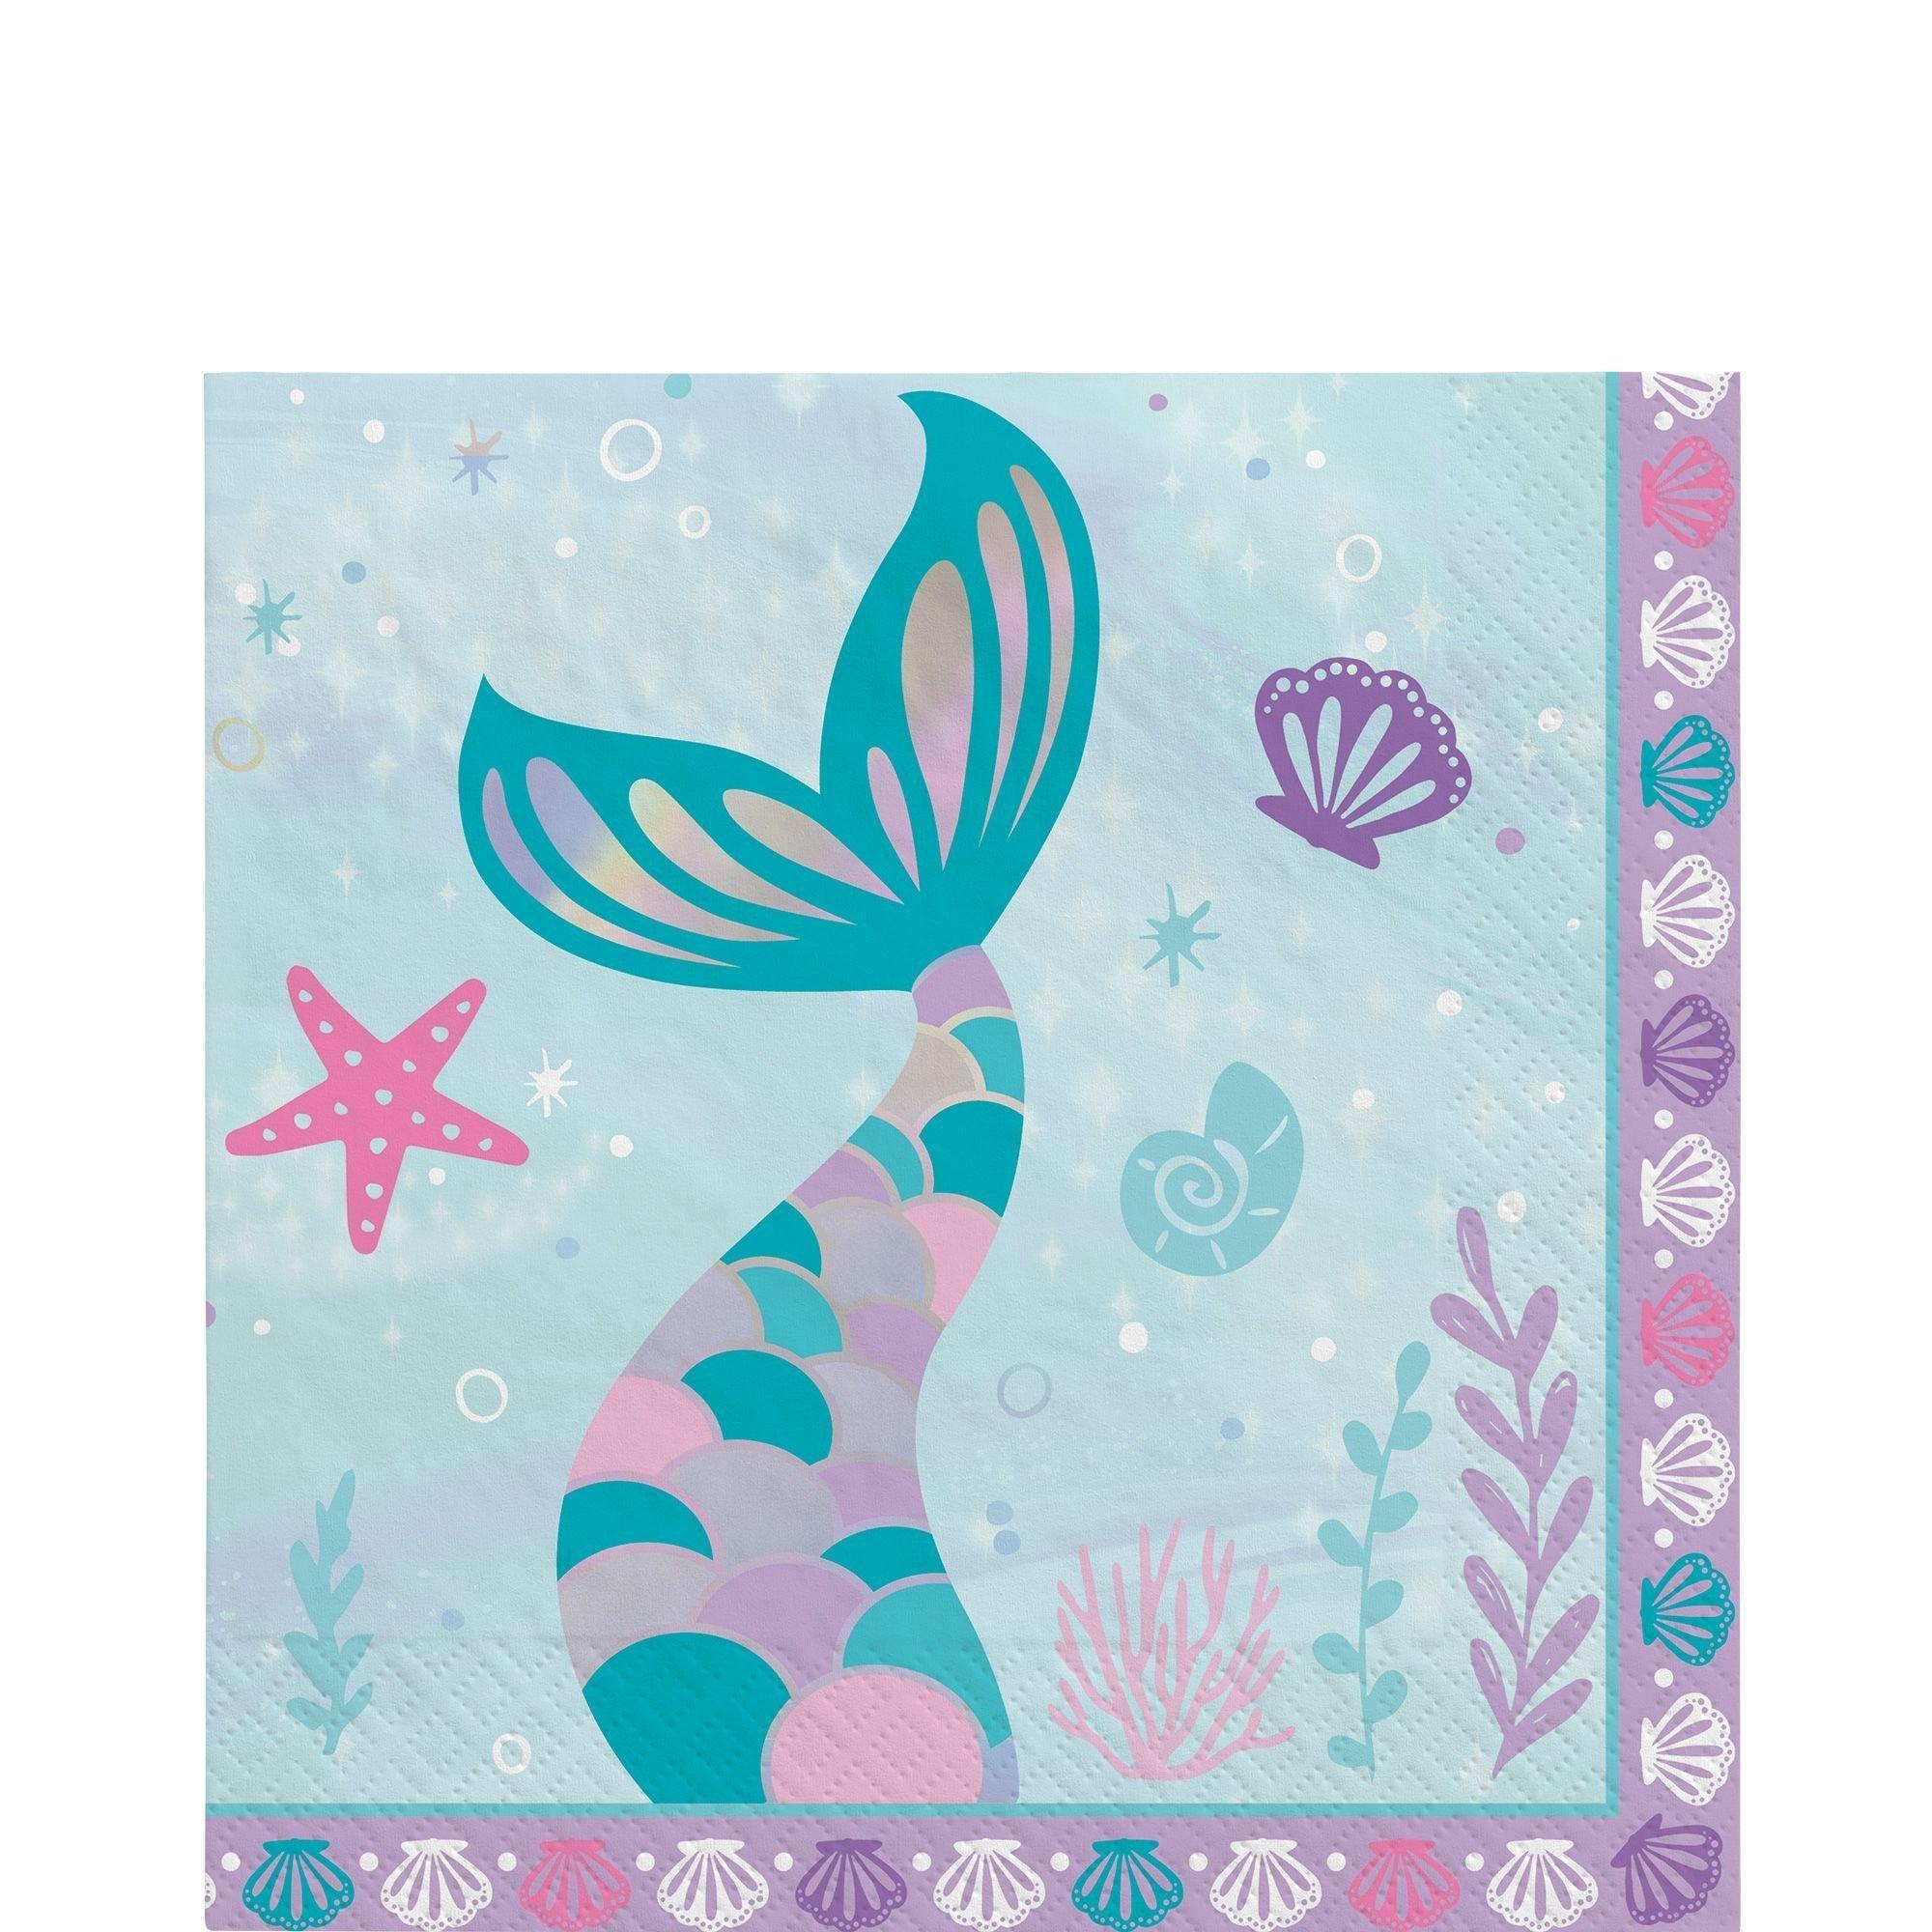 Shimmering Mermaids Party Supplies Pack for 8 Guests - Kit Includes Plates, Napkins & Table Cover